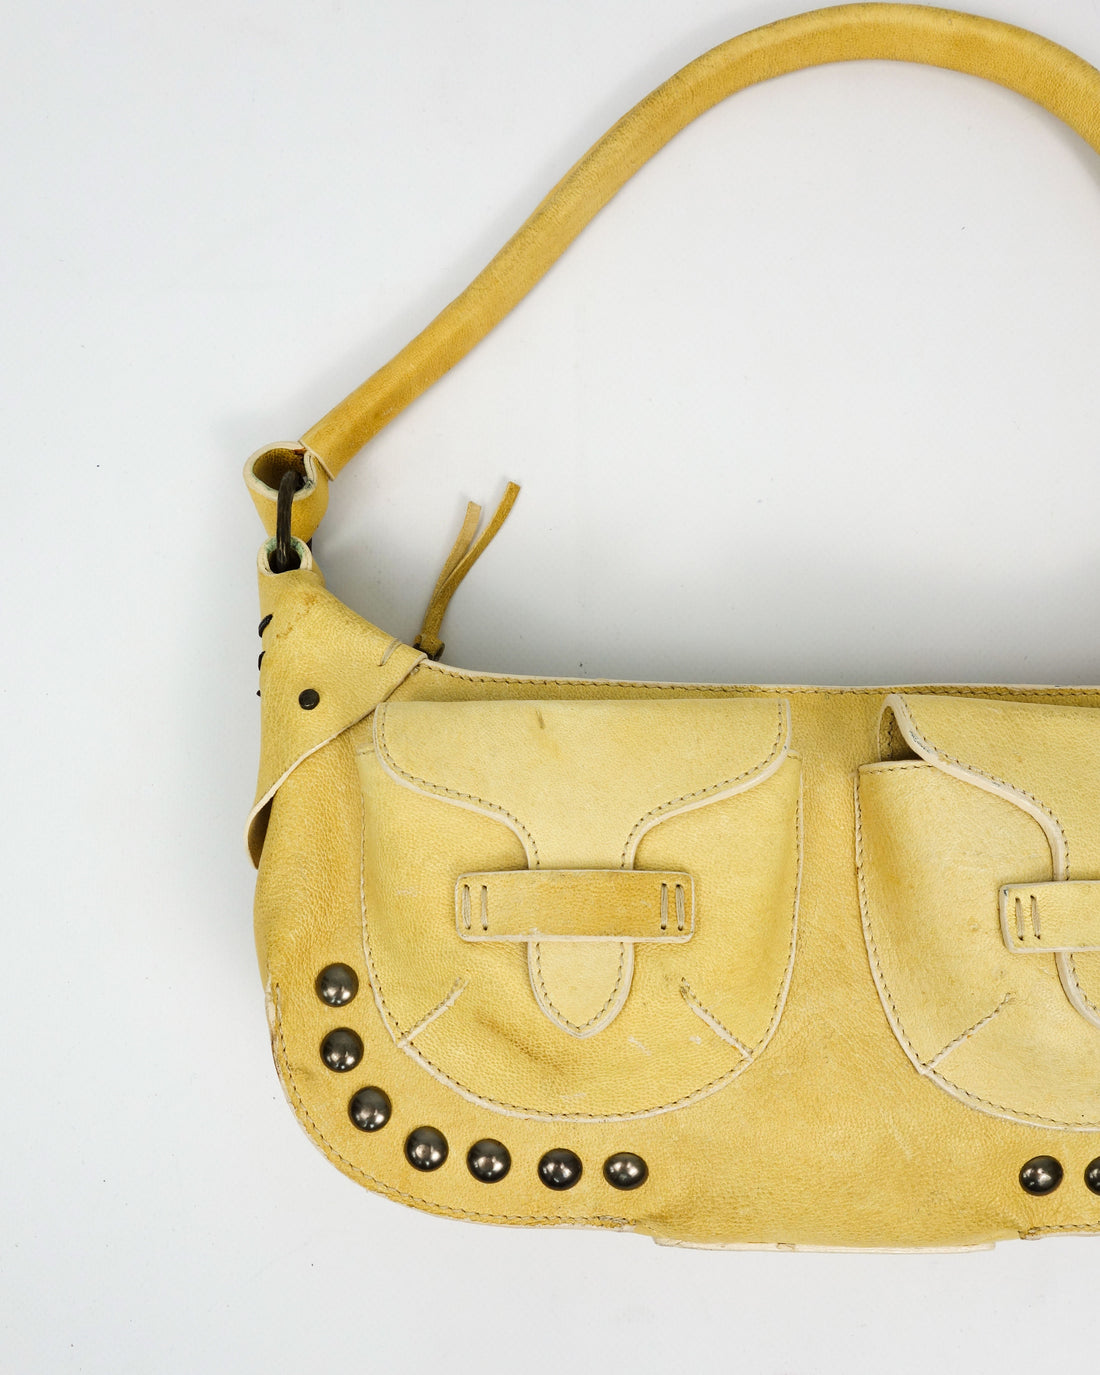 Cavalli Freedom Faded Yellow Leather Bag 2000's